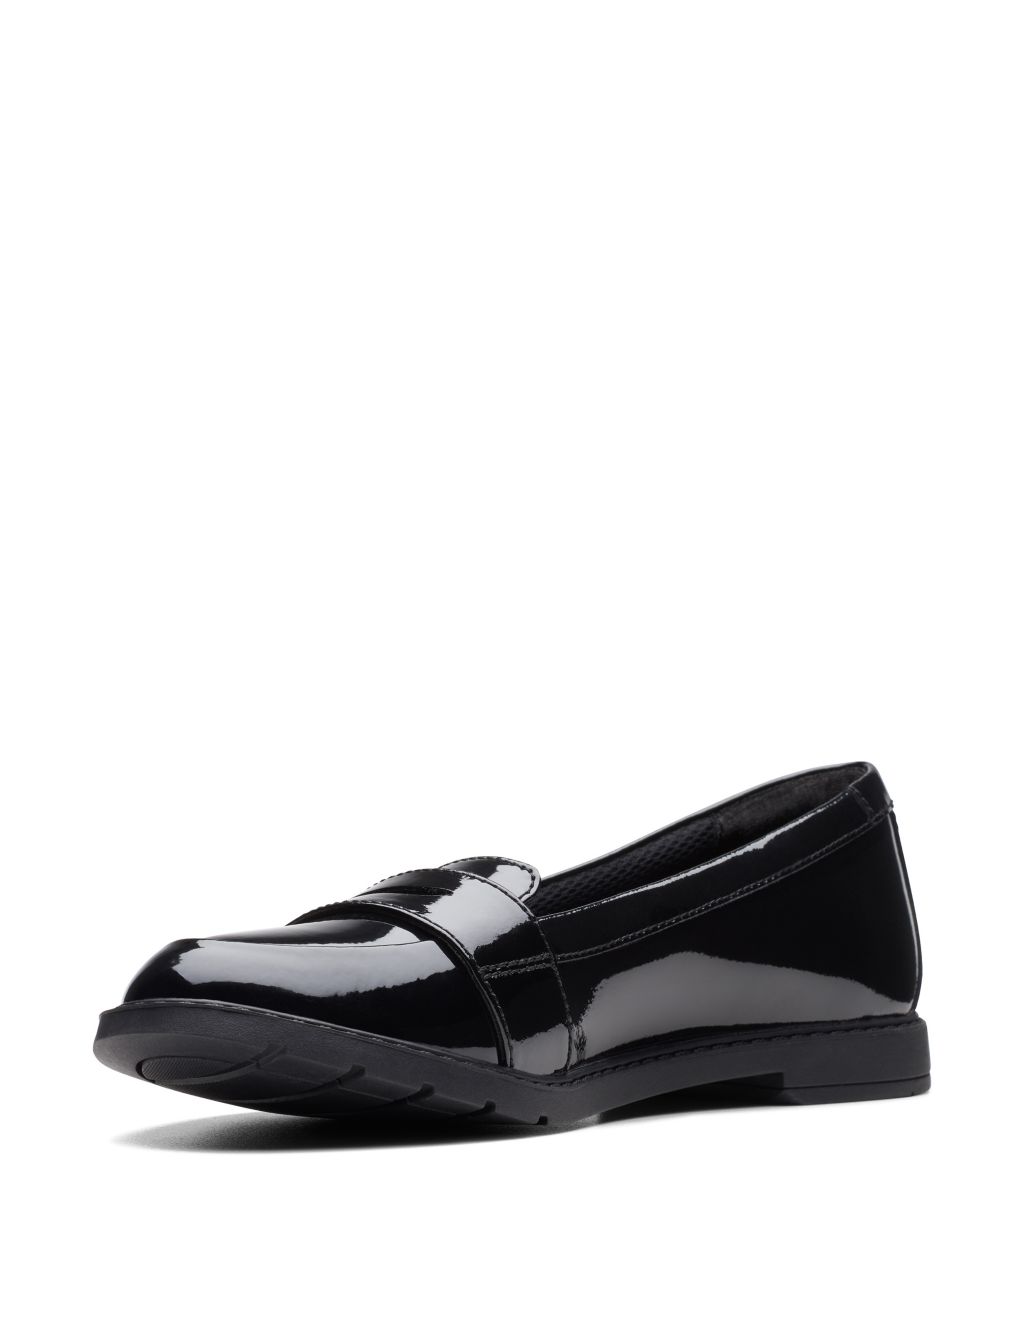 Kids' Patent Leather Slip-On Loafers (3 Small - 8 Small) image 3